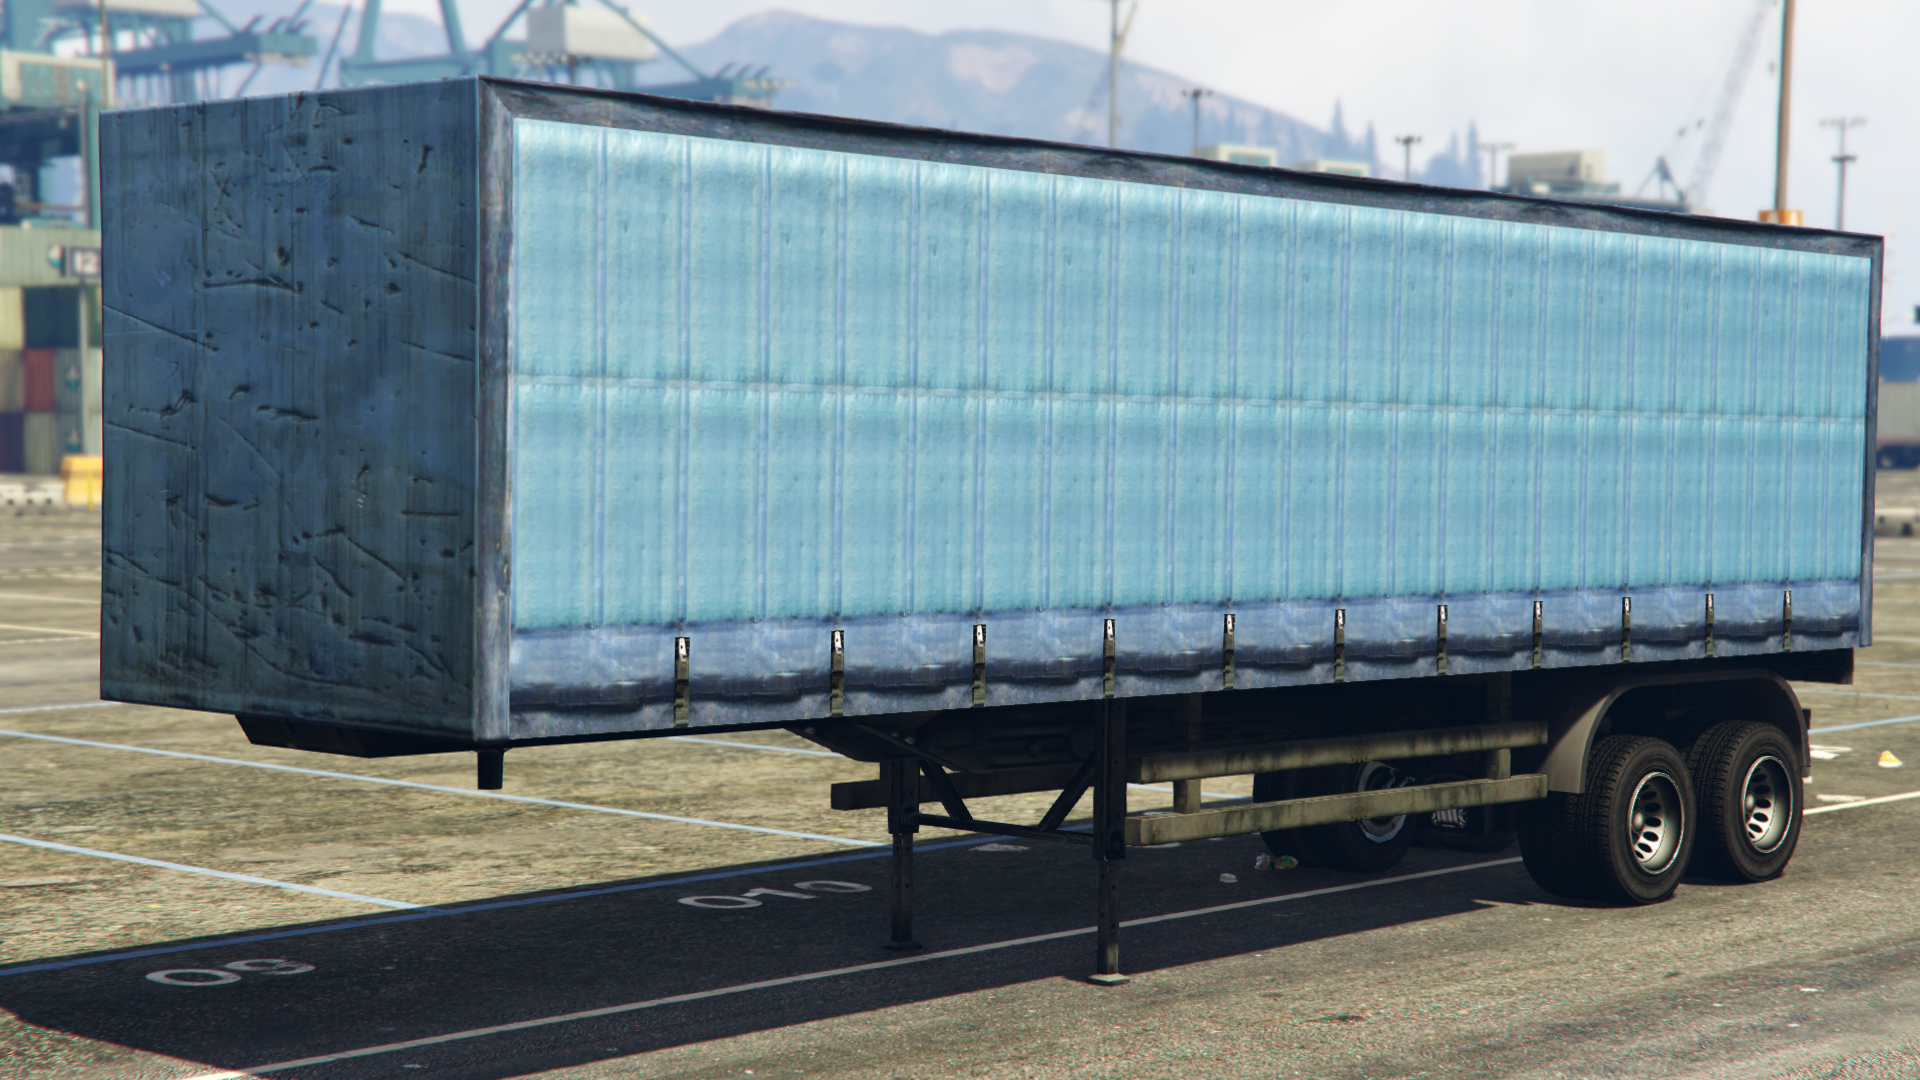 gta 5 truck and trailers